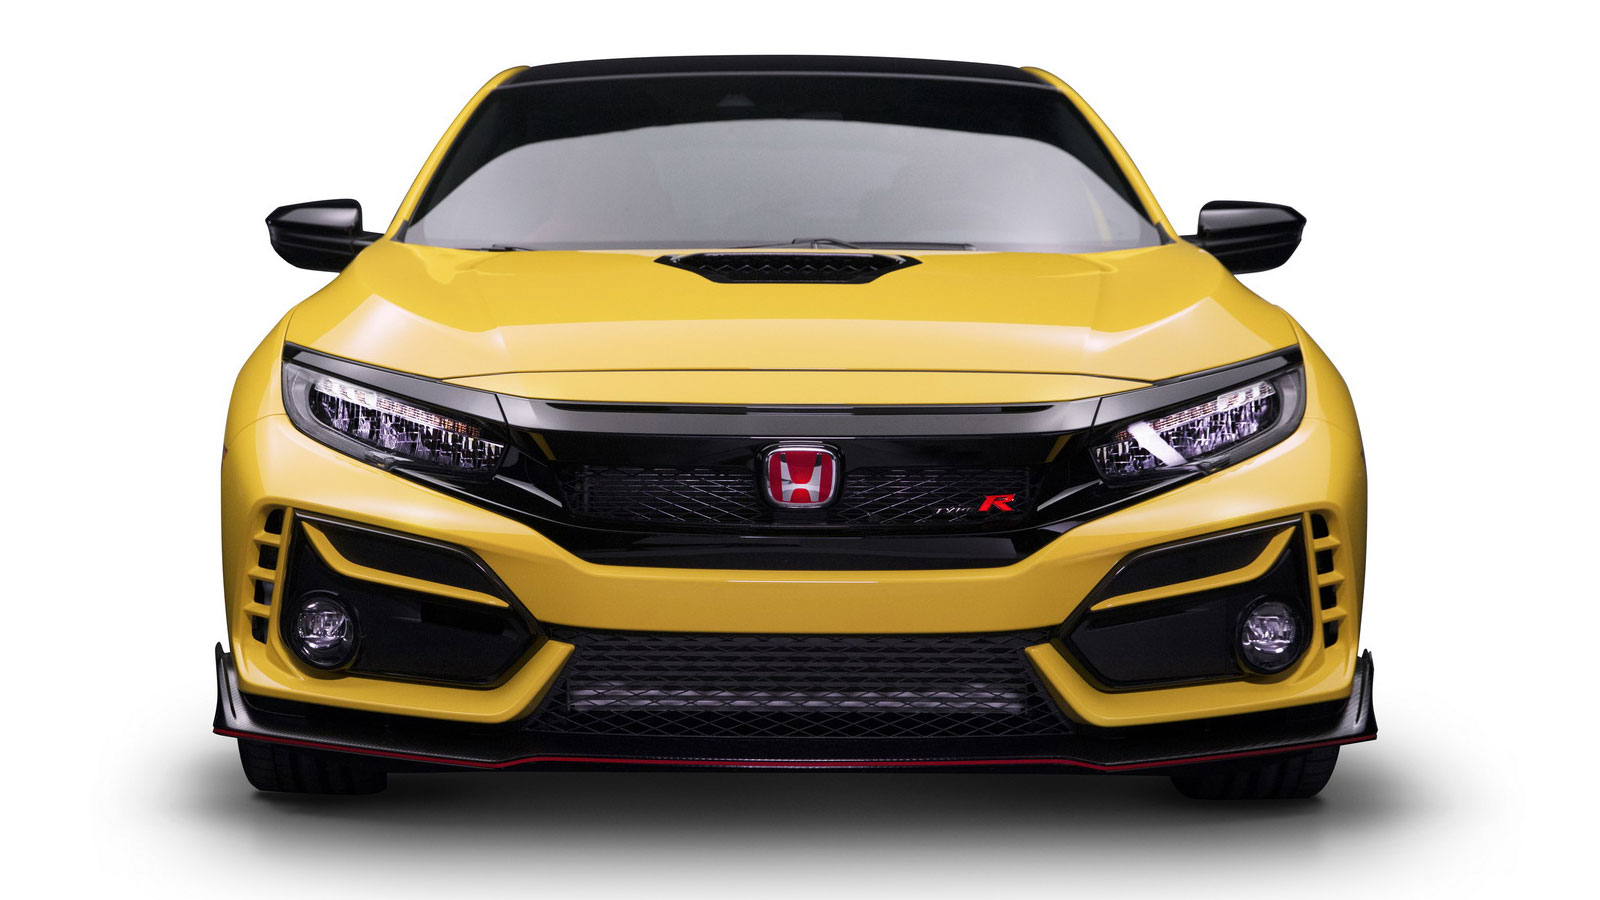 Lighter 21 Honda Civic Type R Limited Edition Promises To Be Ultimate Track Edition Of The Series Carscoops